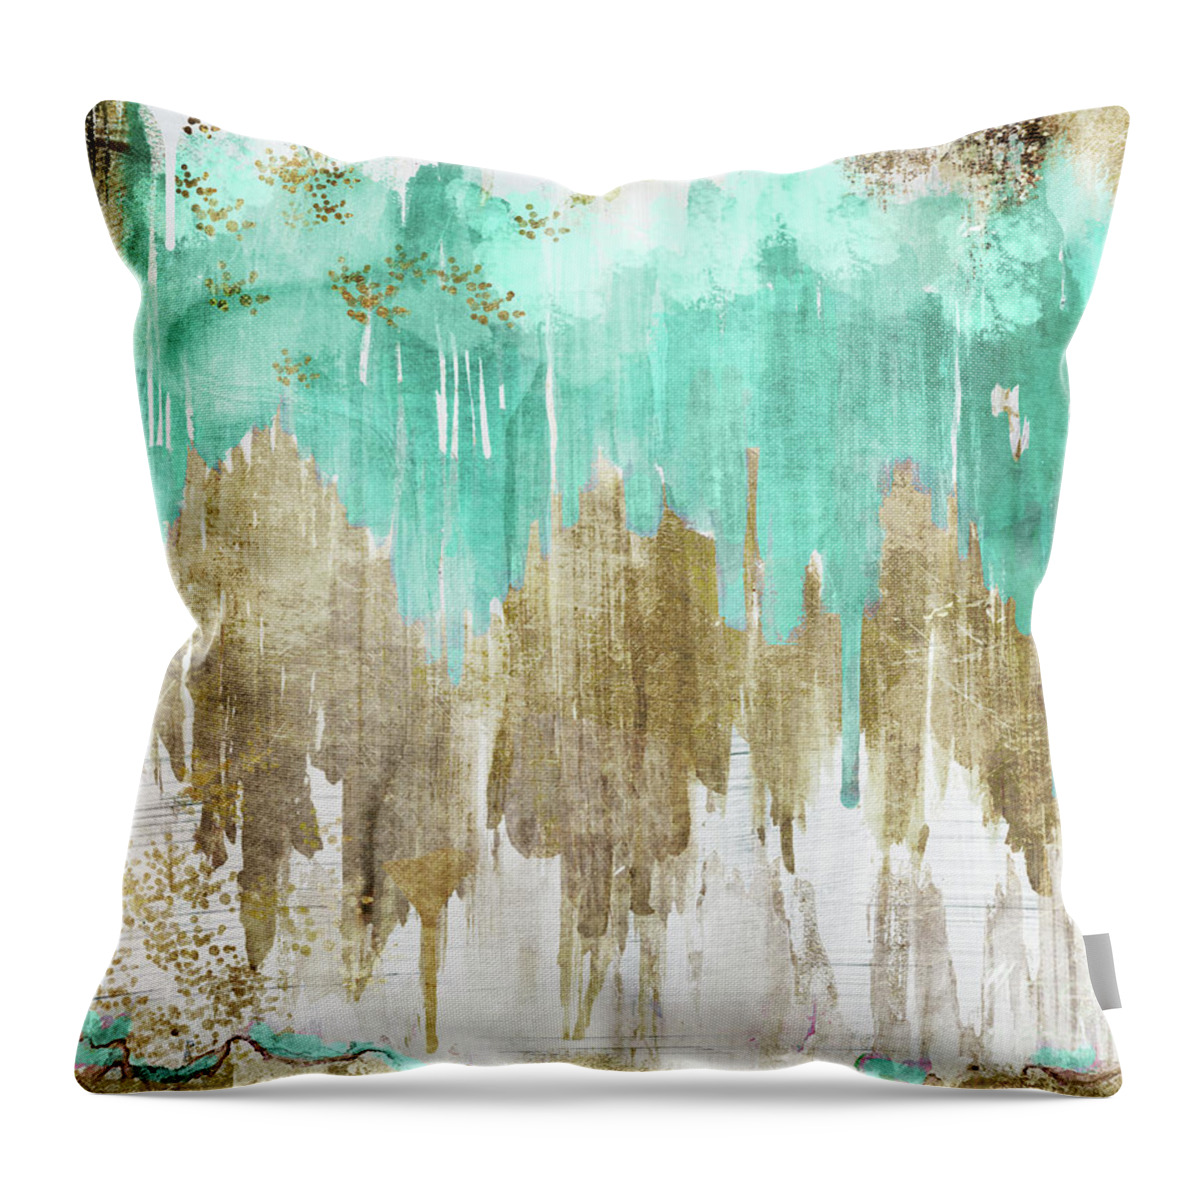 Pattern Throw Pillow featuring the painting Opulence Turquoise by Mindy Sommers